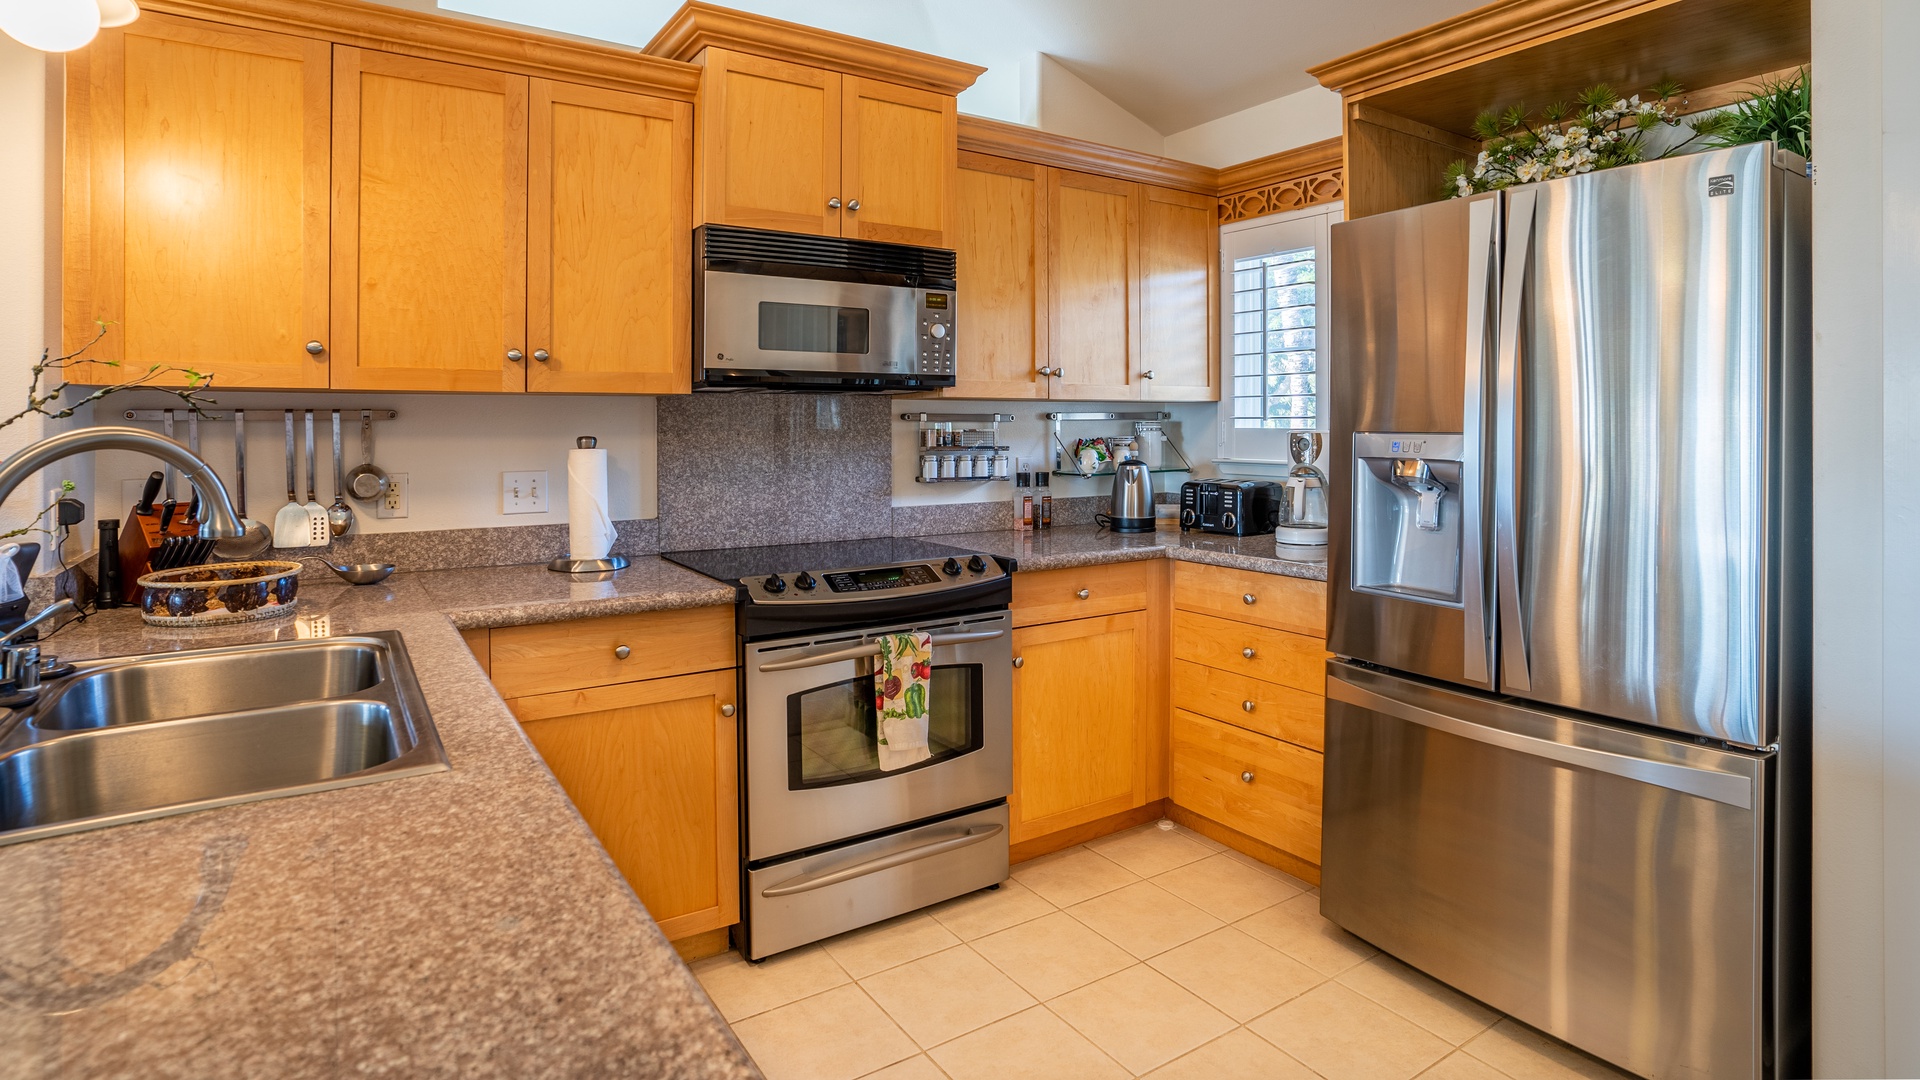 Kapolei Vacation Rentals, Kai Lani 16C - Gracious amenities including stainless steel appliances for your culinary adventures in the kitchen.